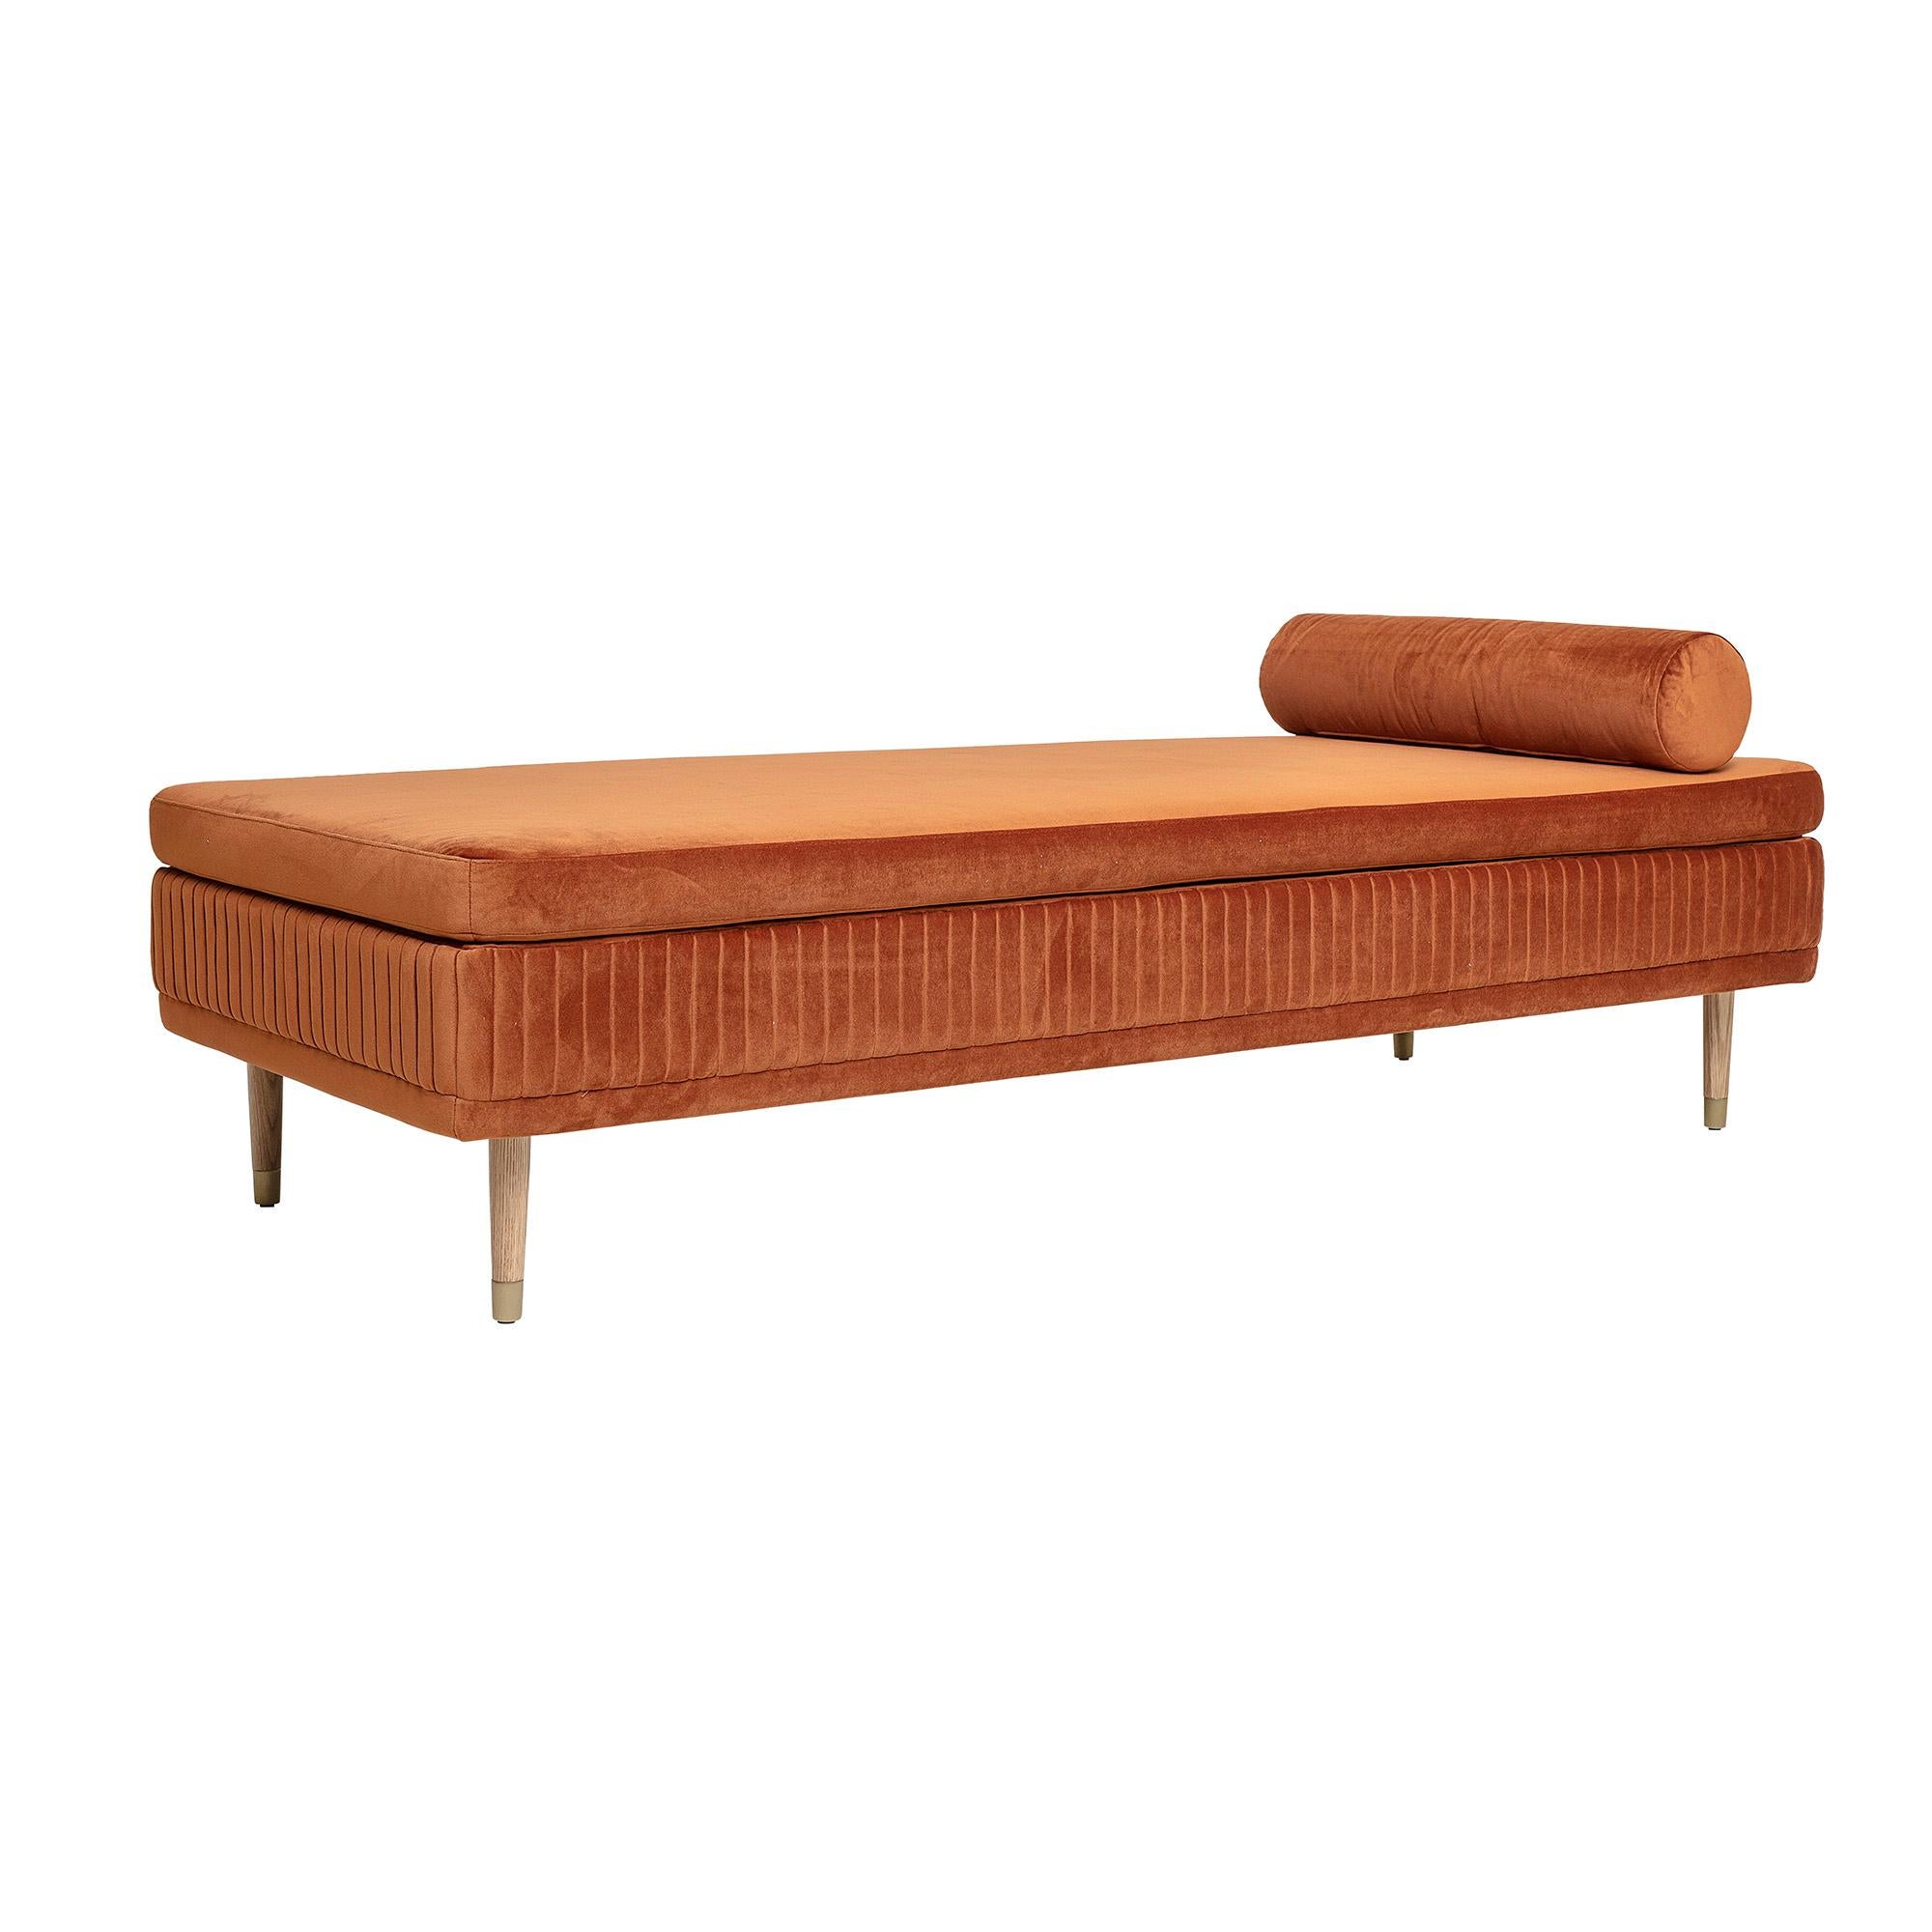 This is a modern Scandinavian design daybed with a bronzed brown velvet upholstery on an oak wood frame with brass colored metal foot detailing. The tour of the upholstery has nice pleated detailing that ads a sophisticated tone to the piece which